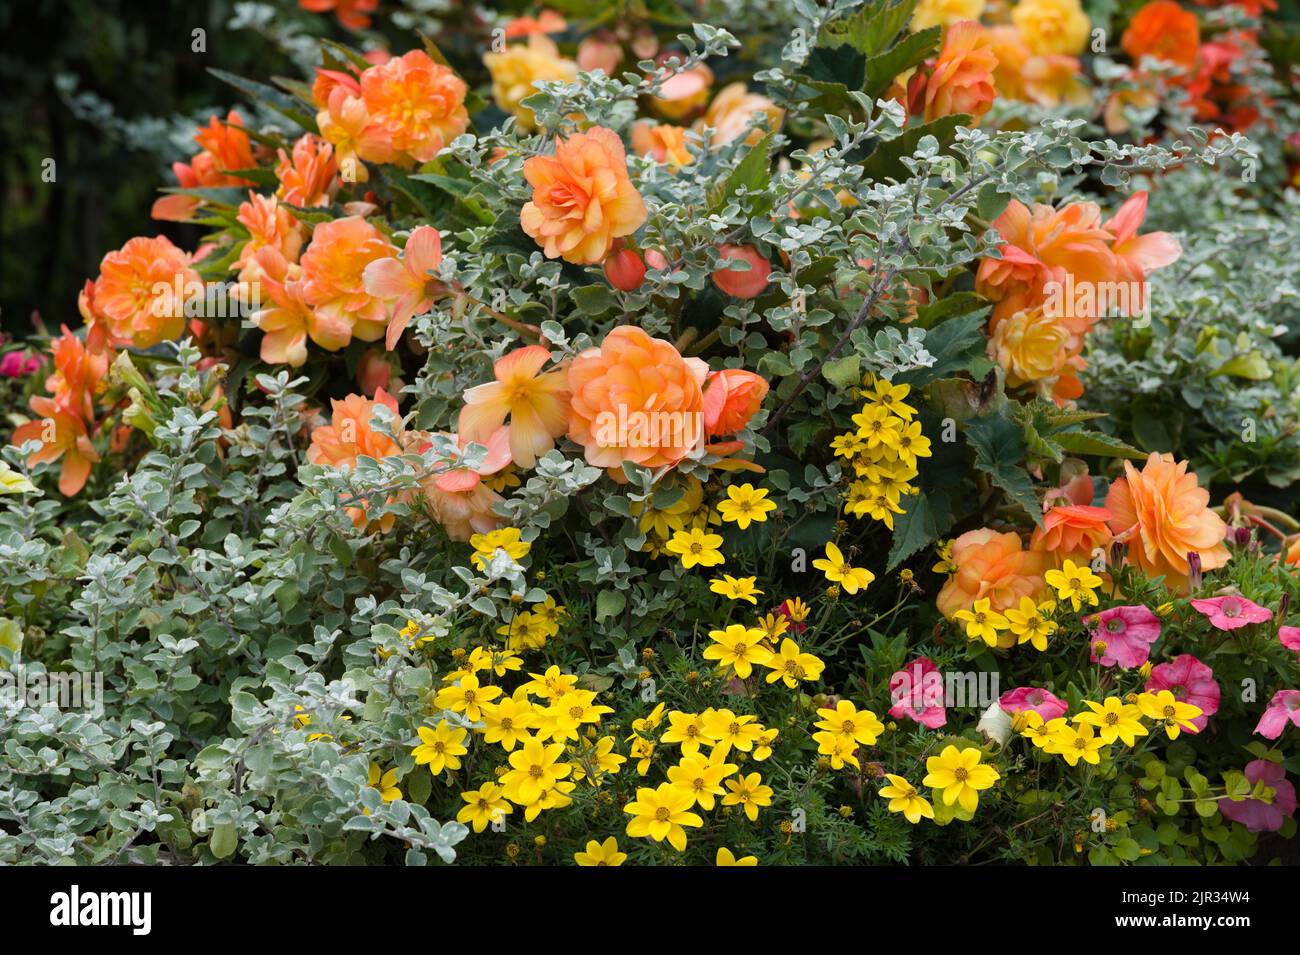 Bright mixborder in a garden with yellow, orange, and pink flowers Stock Photo